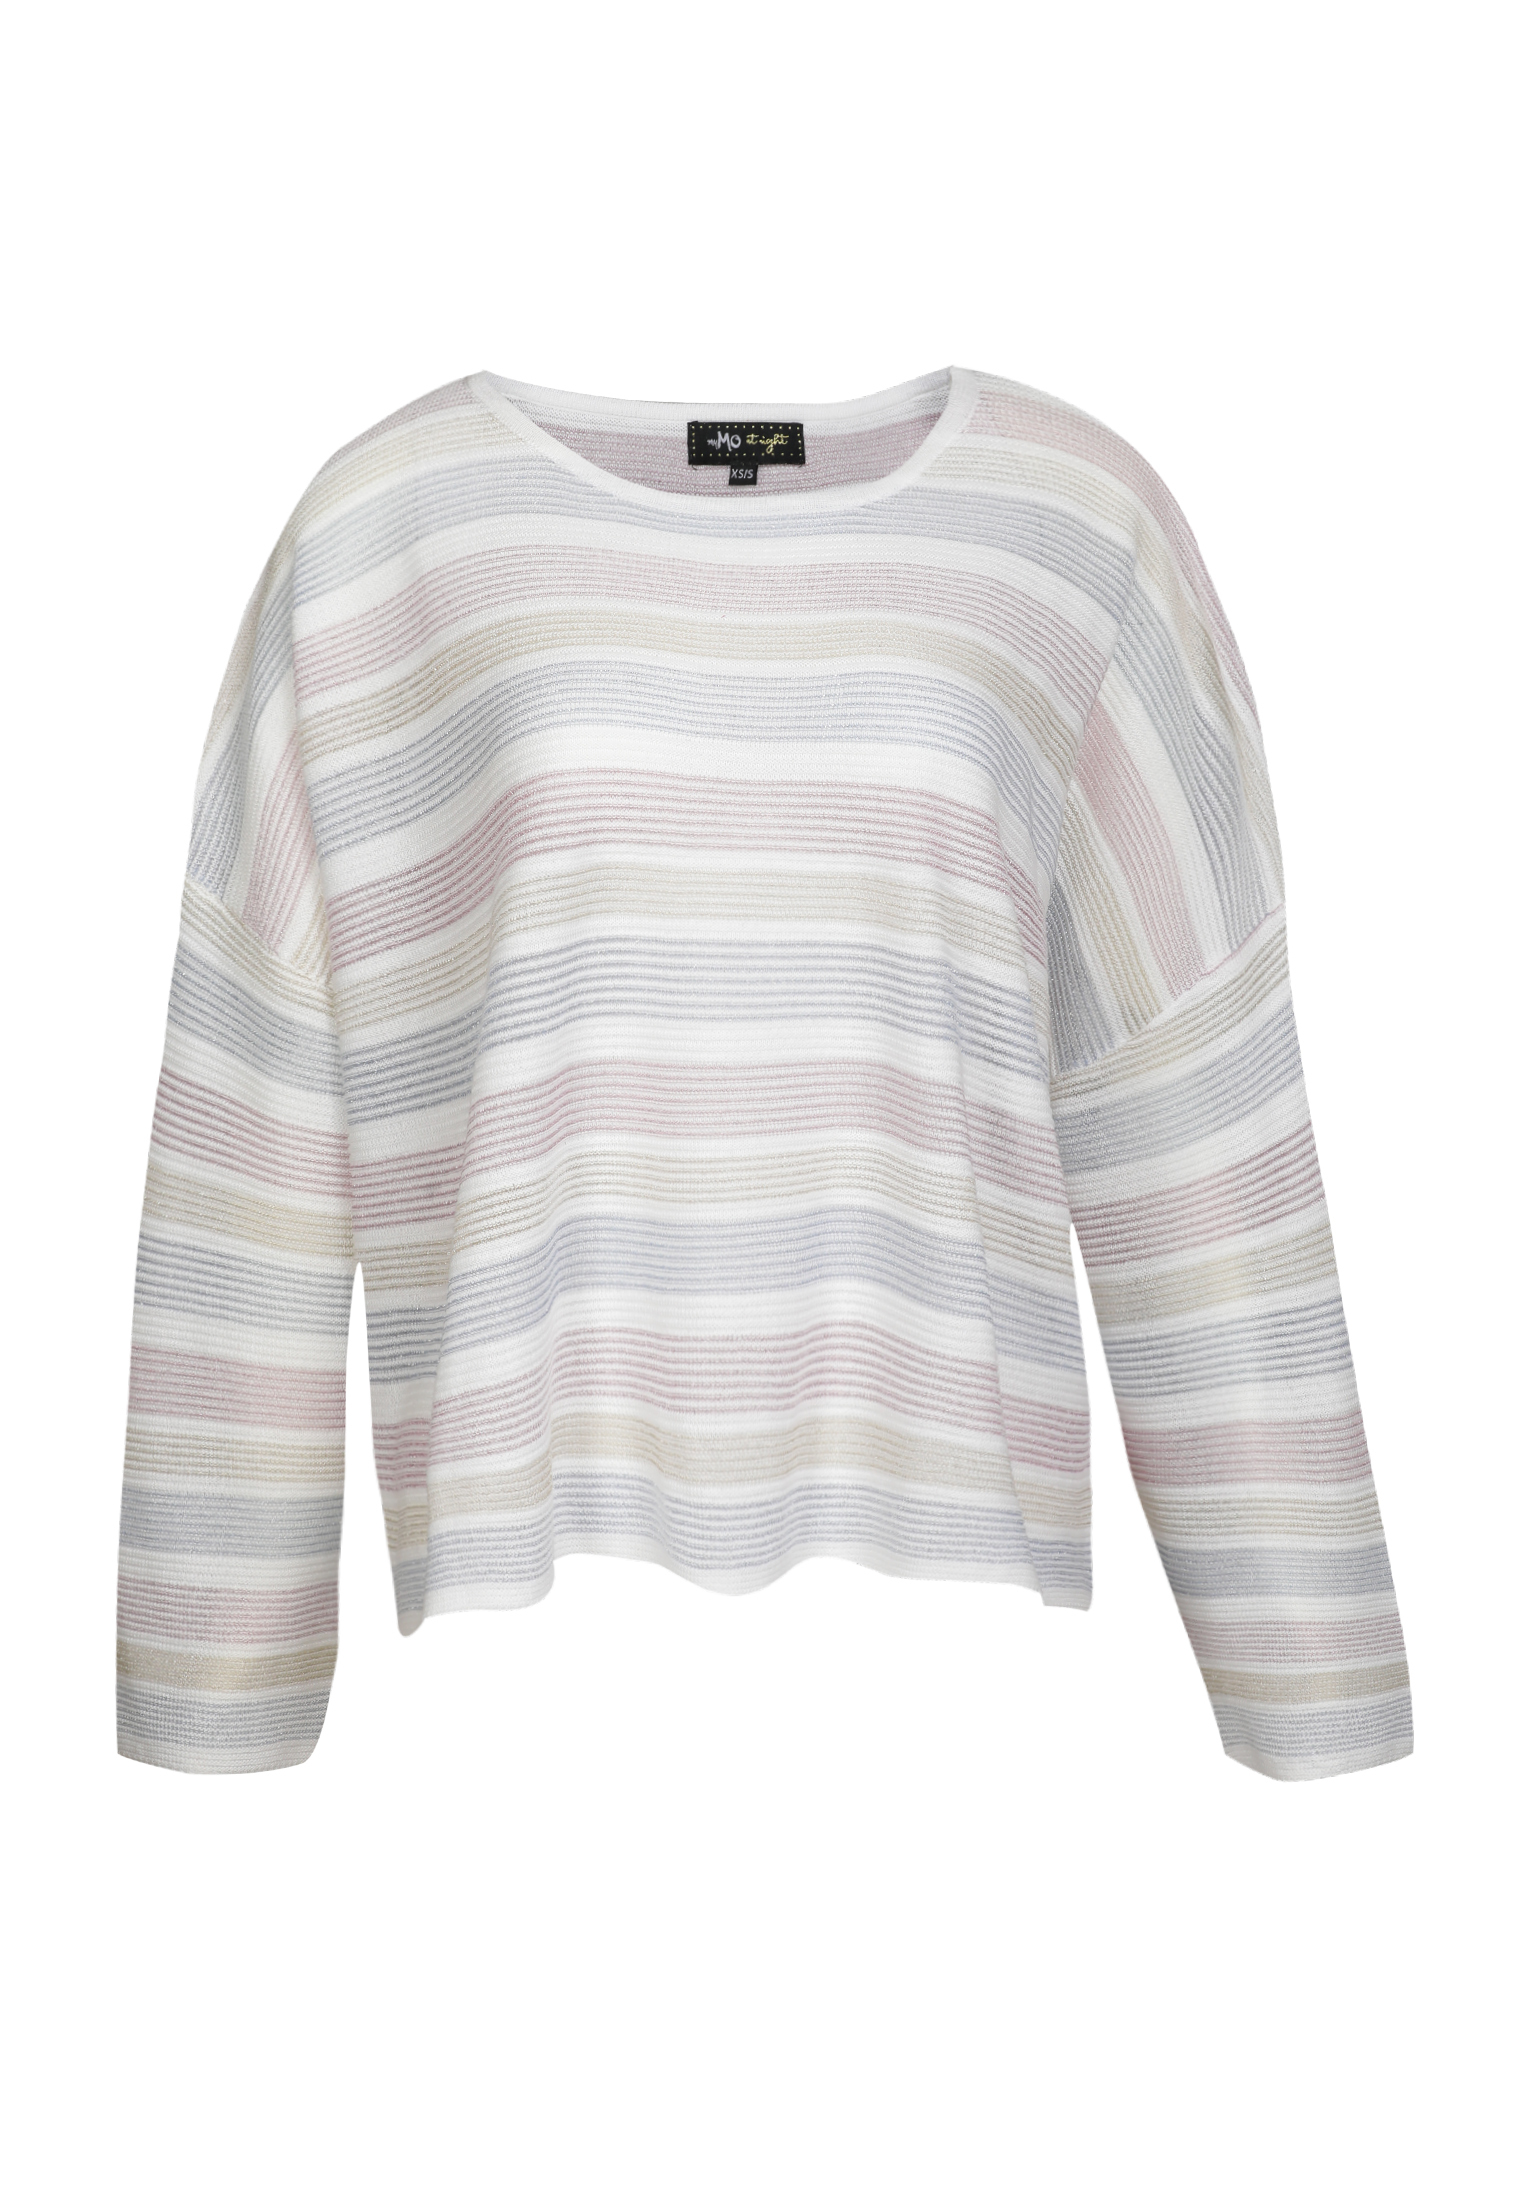 myMo at night Pullover extra large in Bianco Naturale 